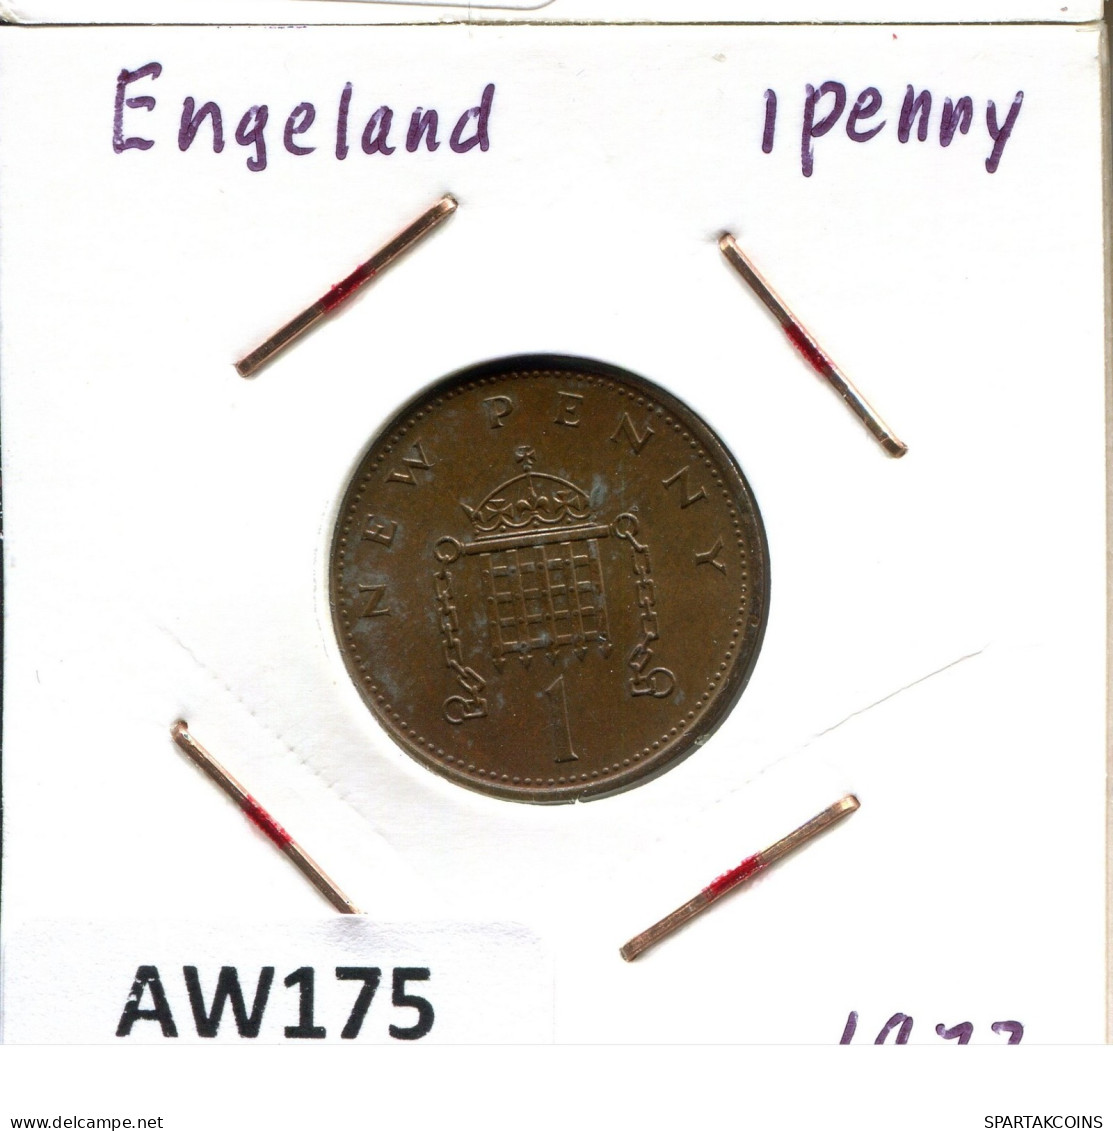 NEW PENNY 1973 UK GROßBRITANNIEN GREAT BRITAIN Münze #AW175.D.A - 1 Penny & 1 New Penny